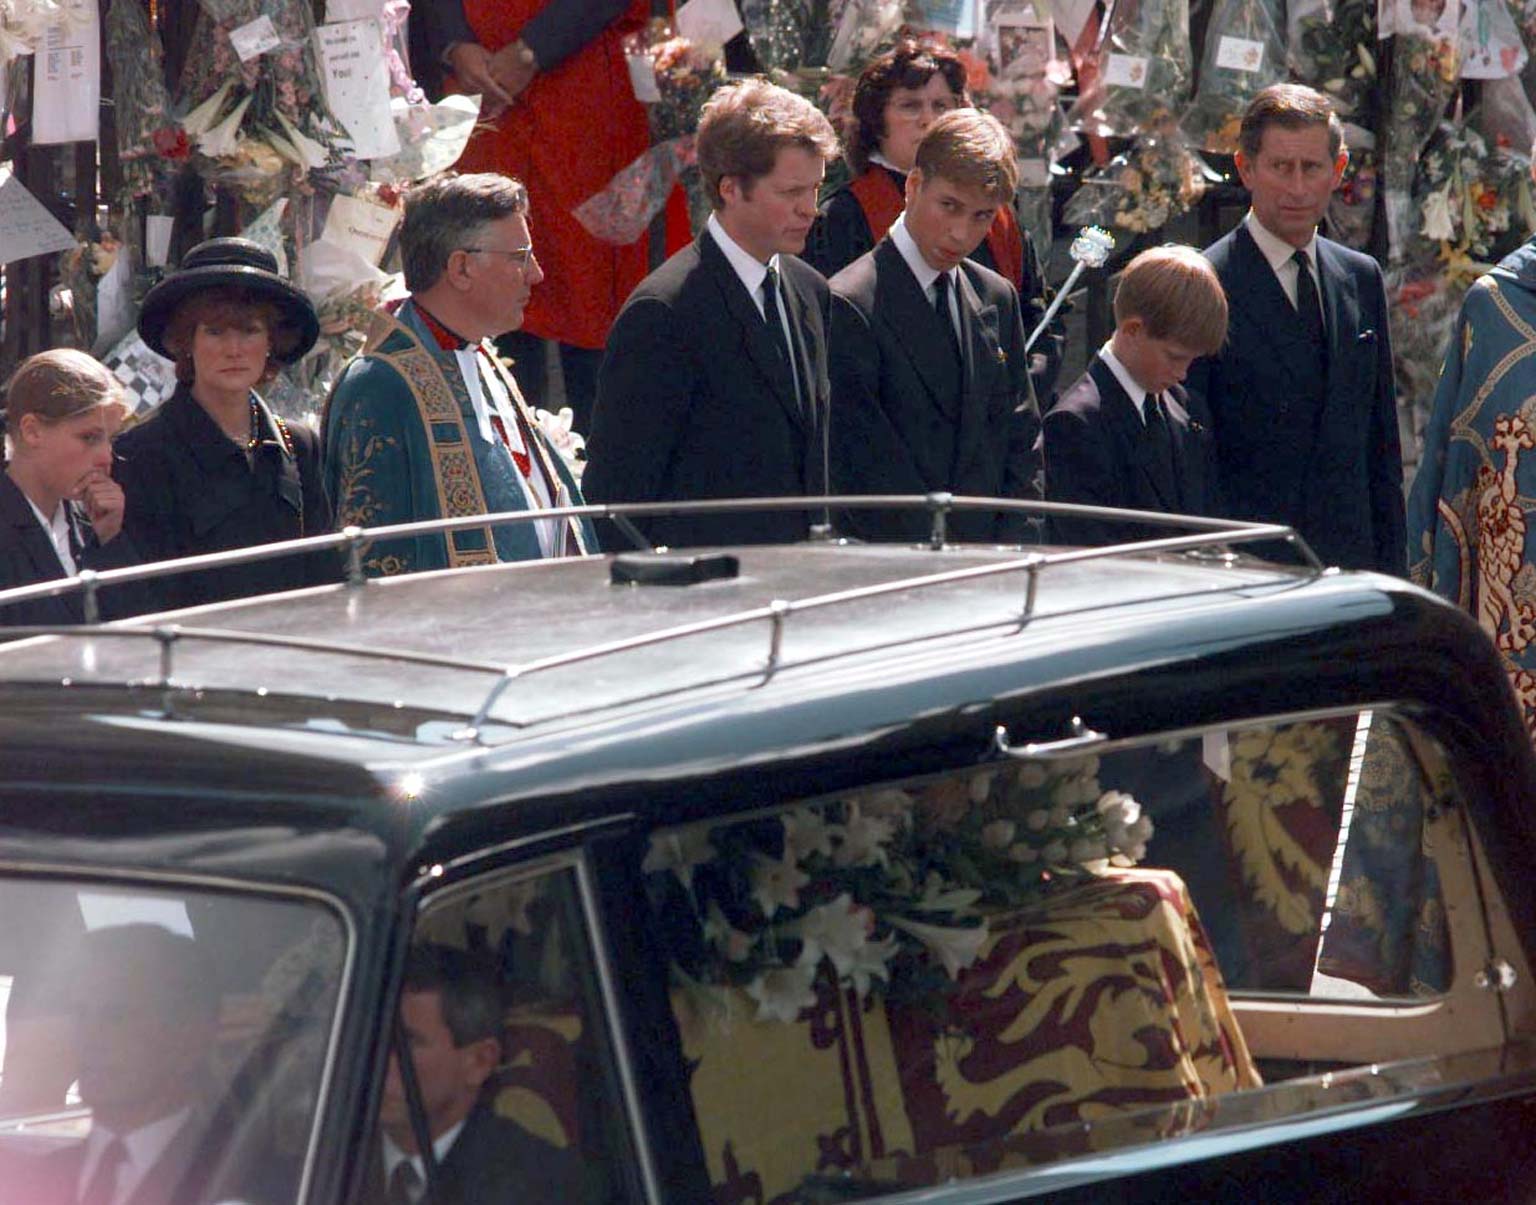 Diana's funeral in 1997 